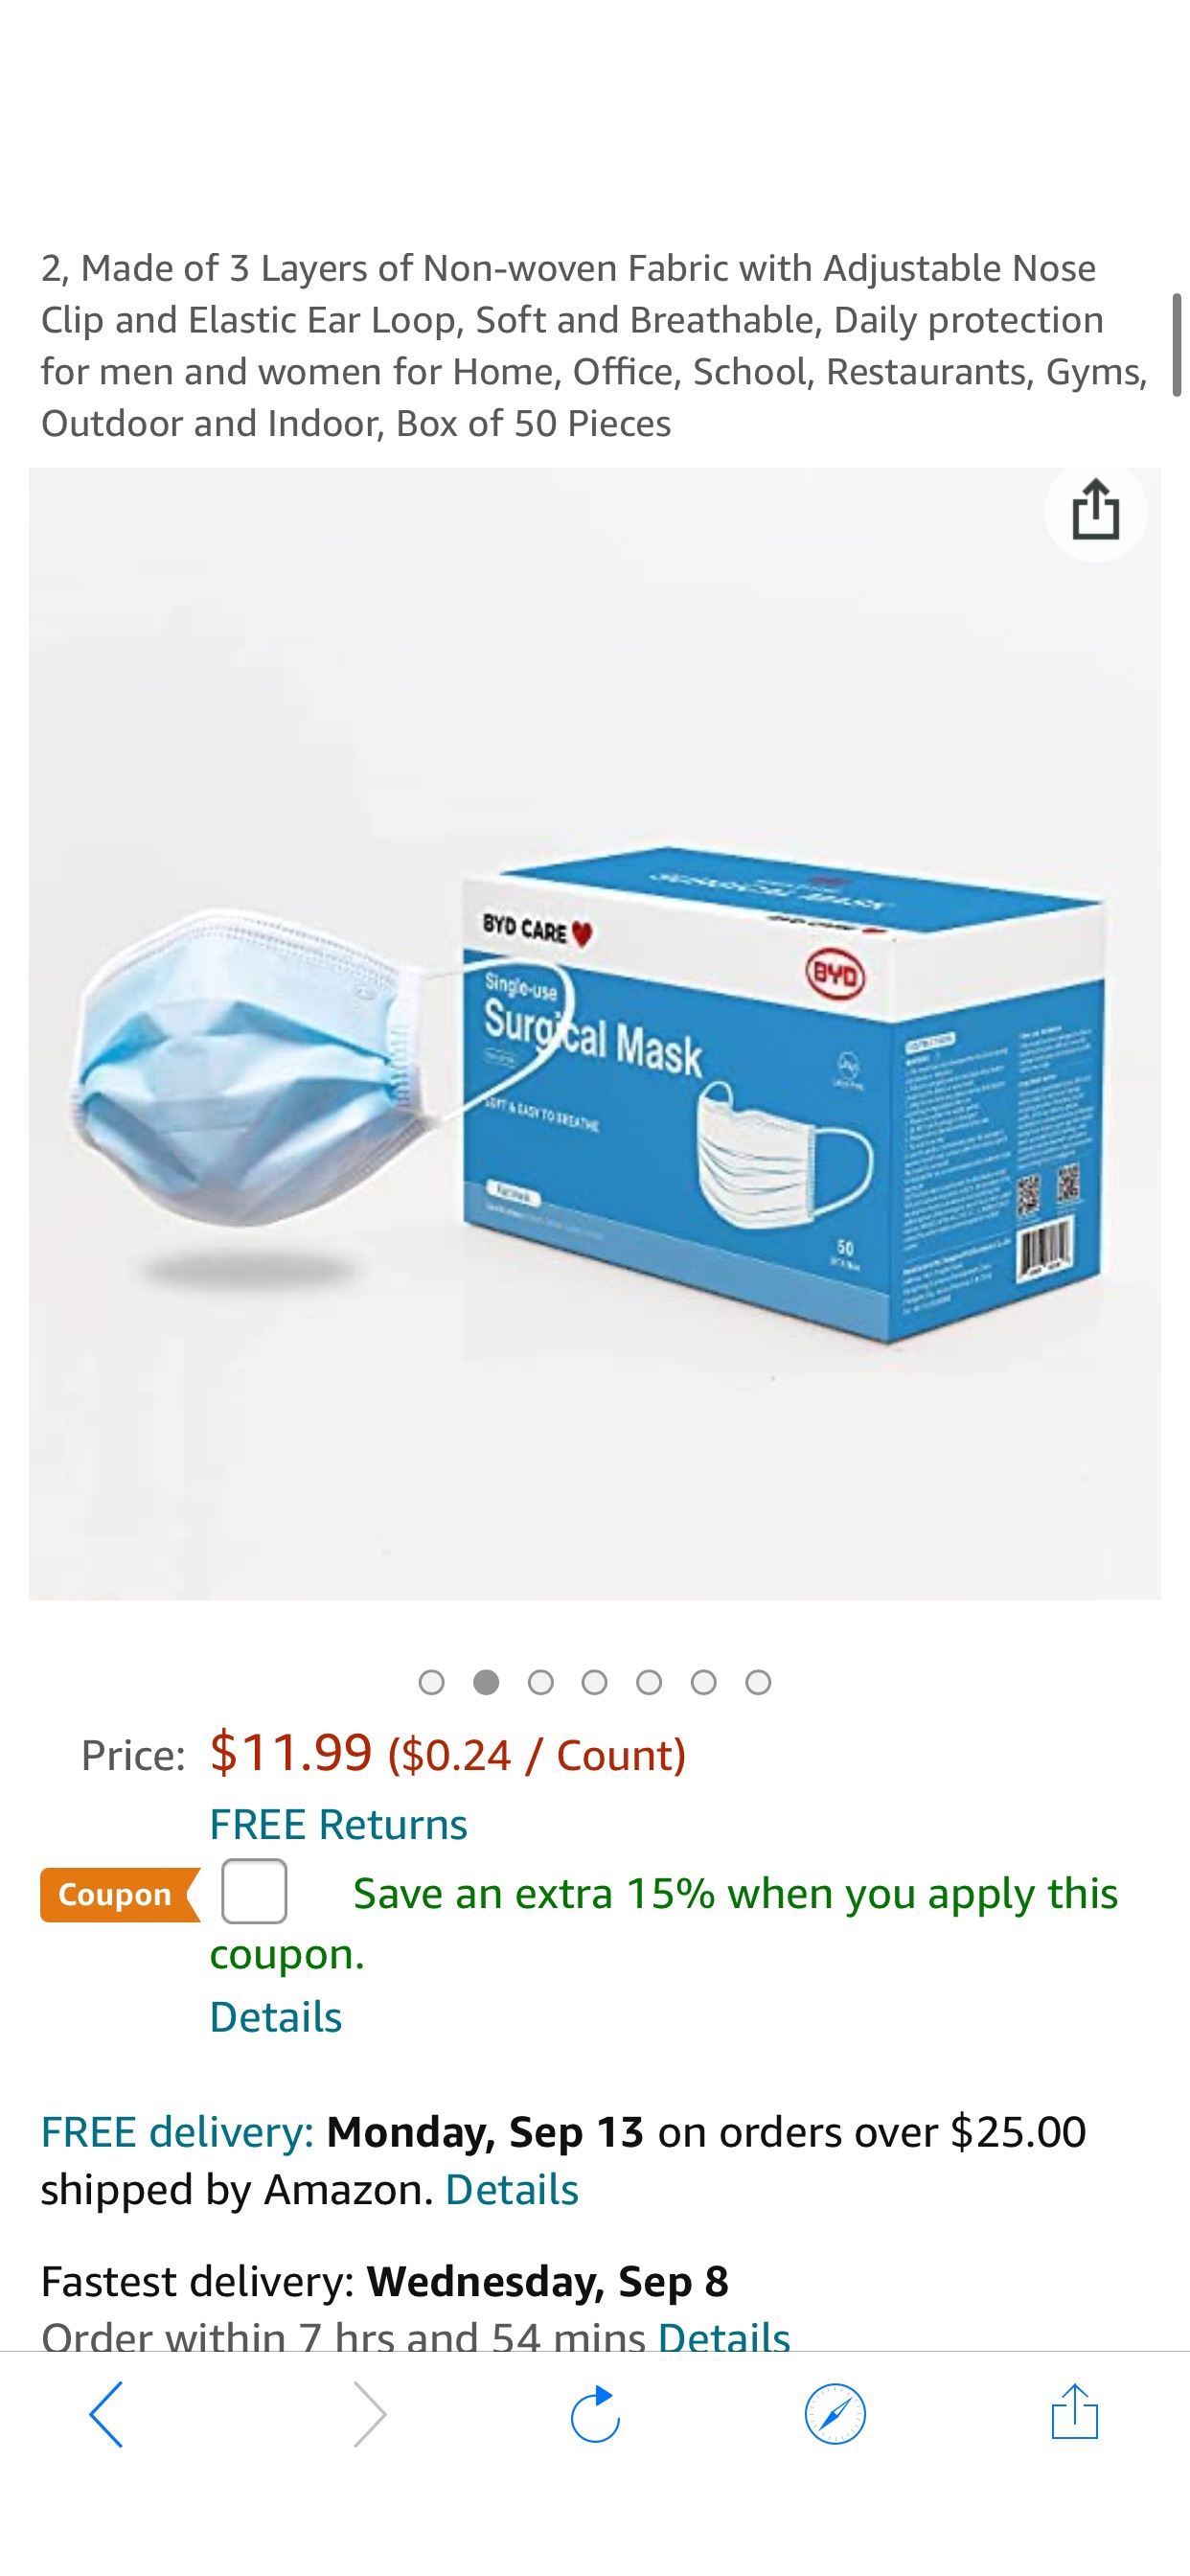 Amazon.com: BYD 一次性口罩减价了CARE Single Use Disposable 3-Ply Surgical Mask, ASTM Level 2, Made of 3 Layers of Non-woven